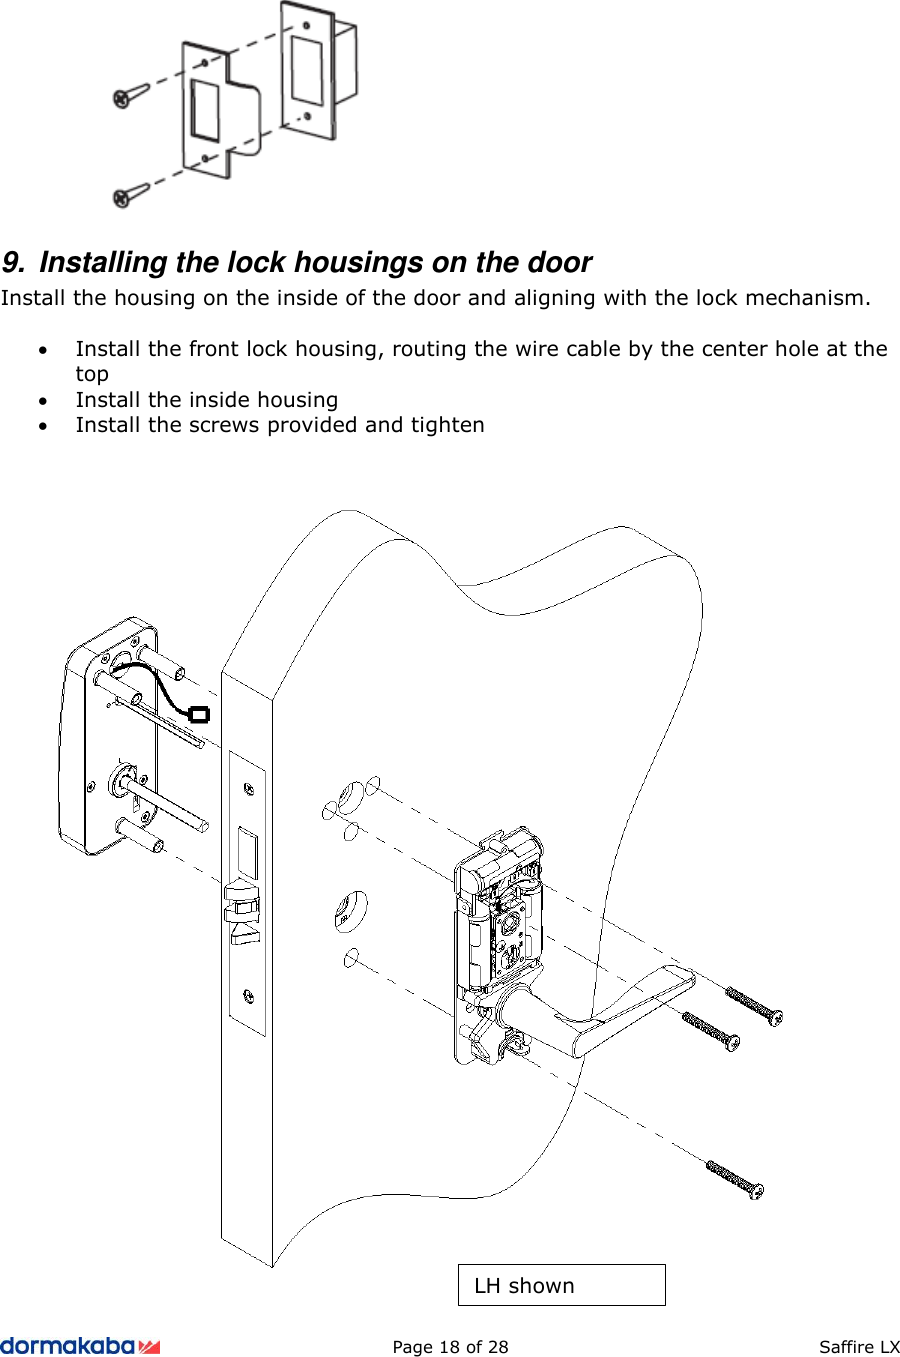          Page 18 of 28  Saffire LX       9.  Installing the lock housings on the door Install the housing on the inside of the door and aligning with the lock mechanism.  • Install the front lock housing, routing the wire cable by the center hole at the top • Install the inside housing • Install the screws provided and tighten     LH shown 